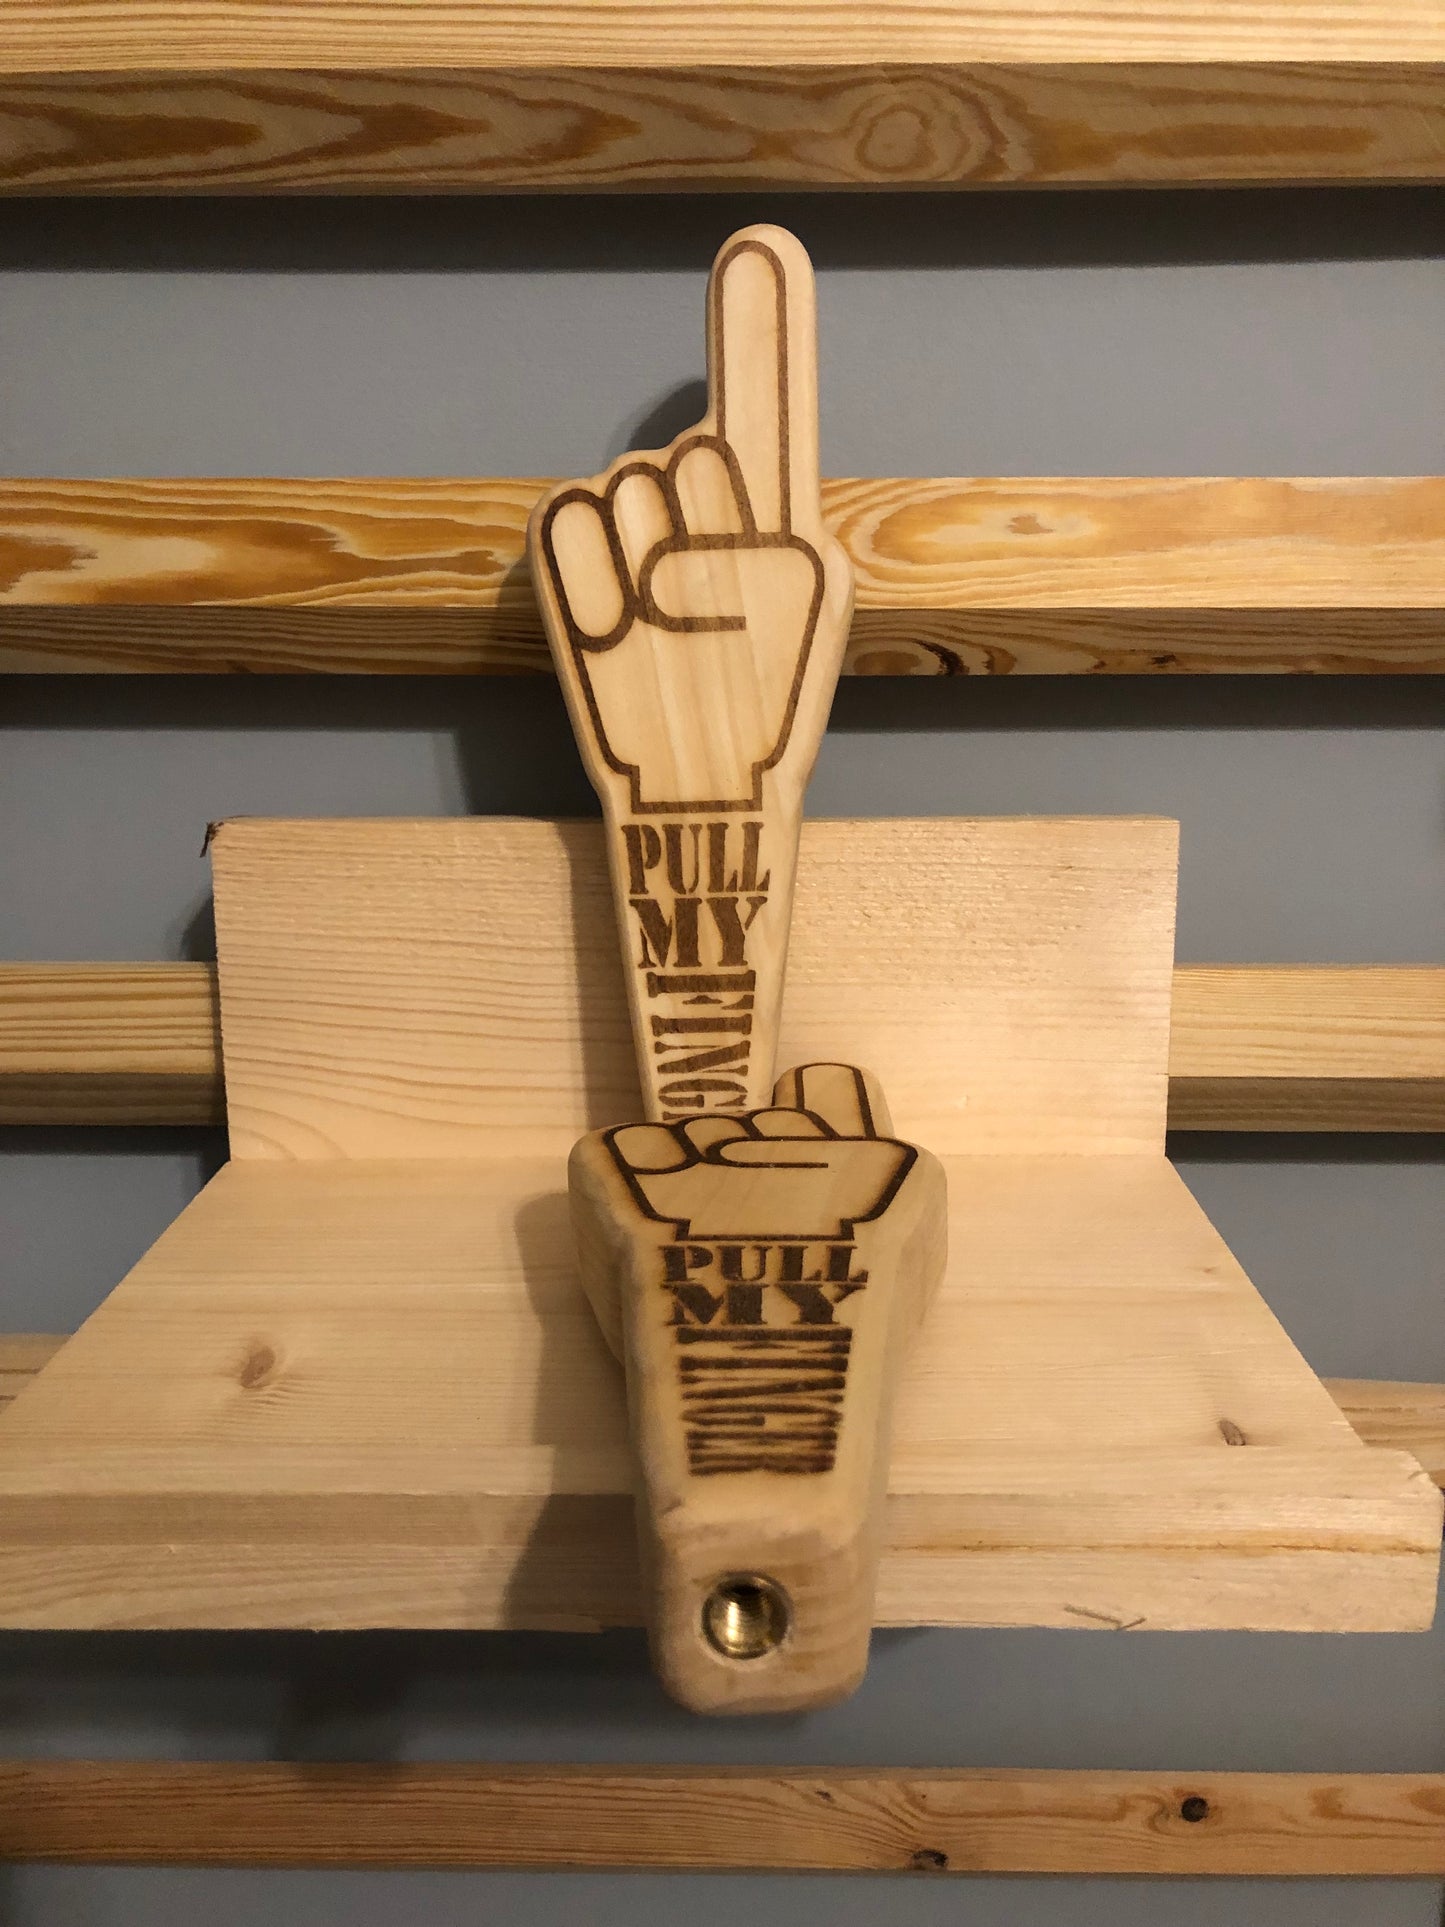 Pull my finger tap handle